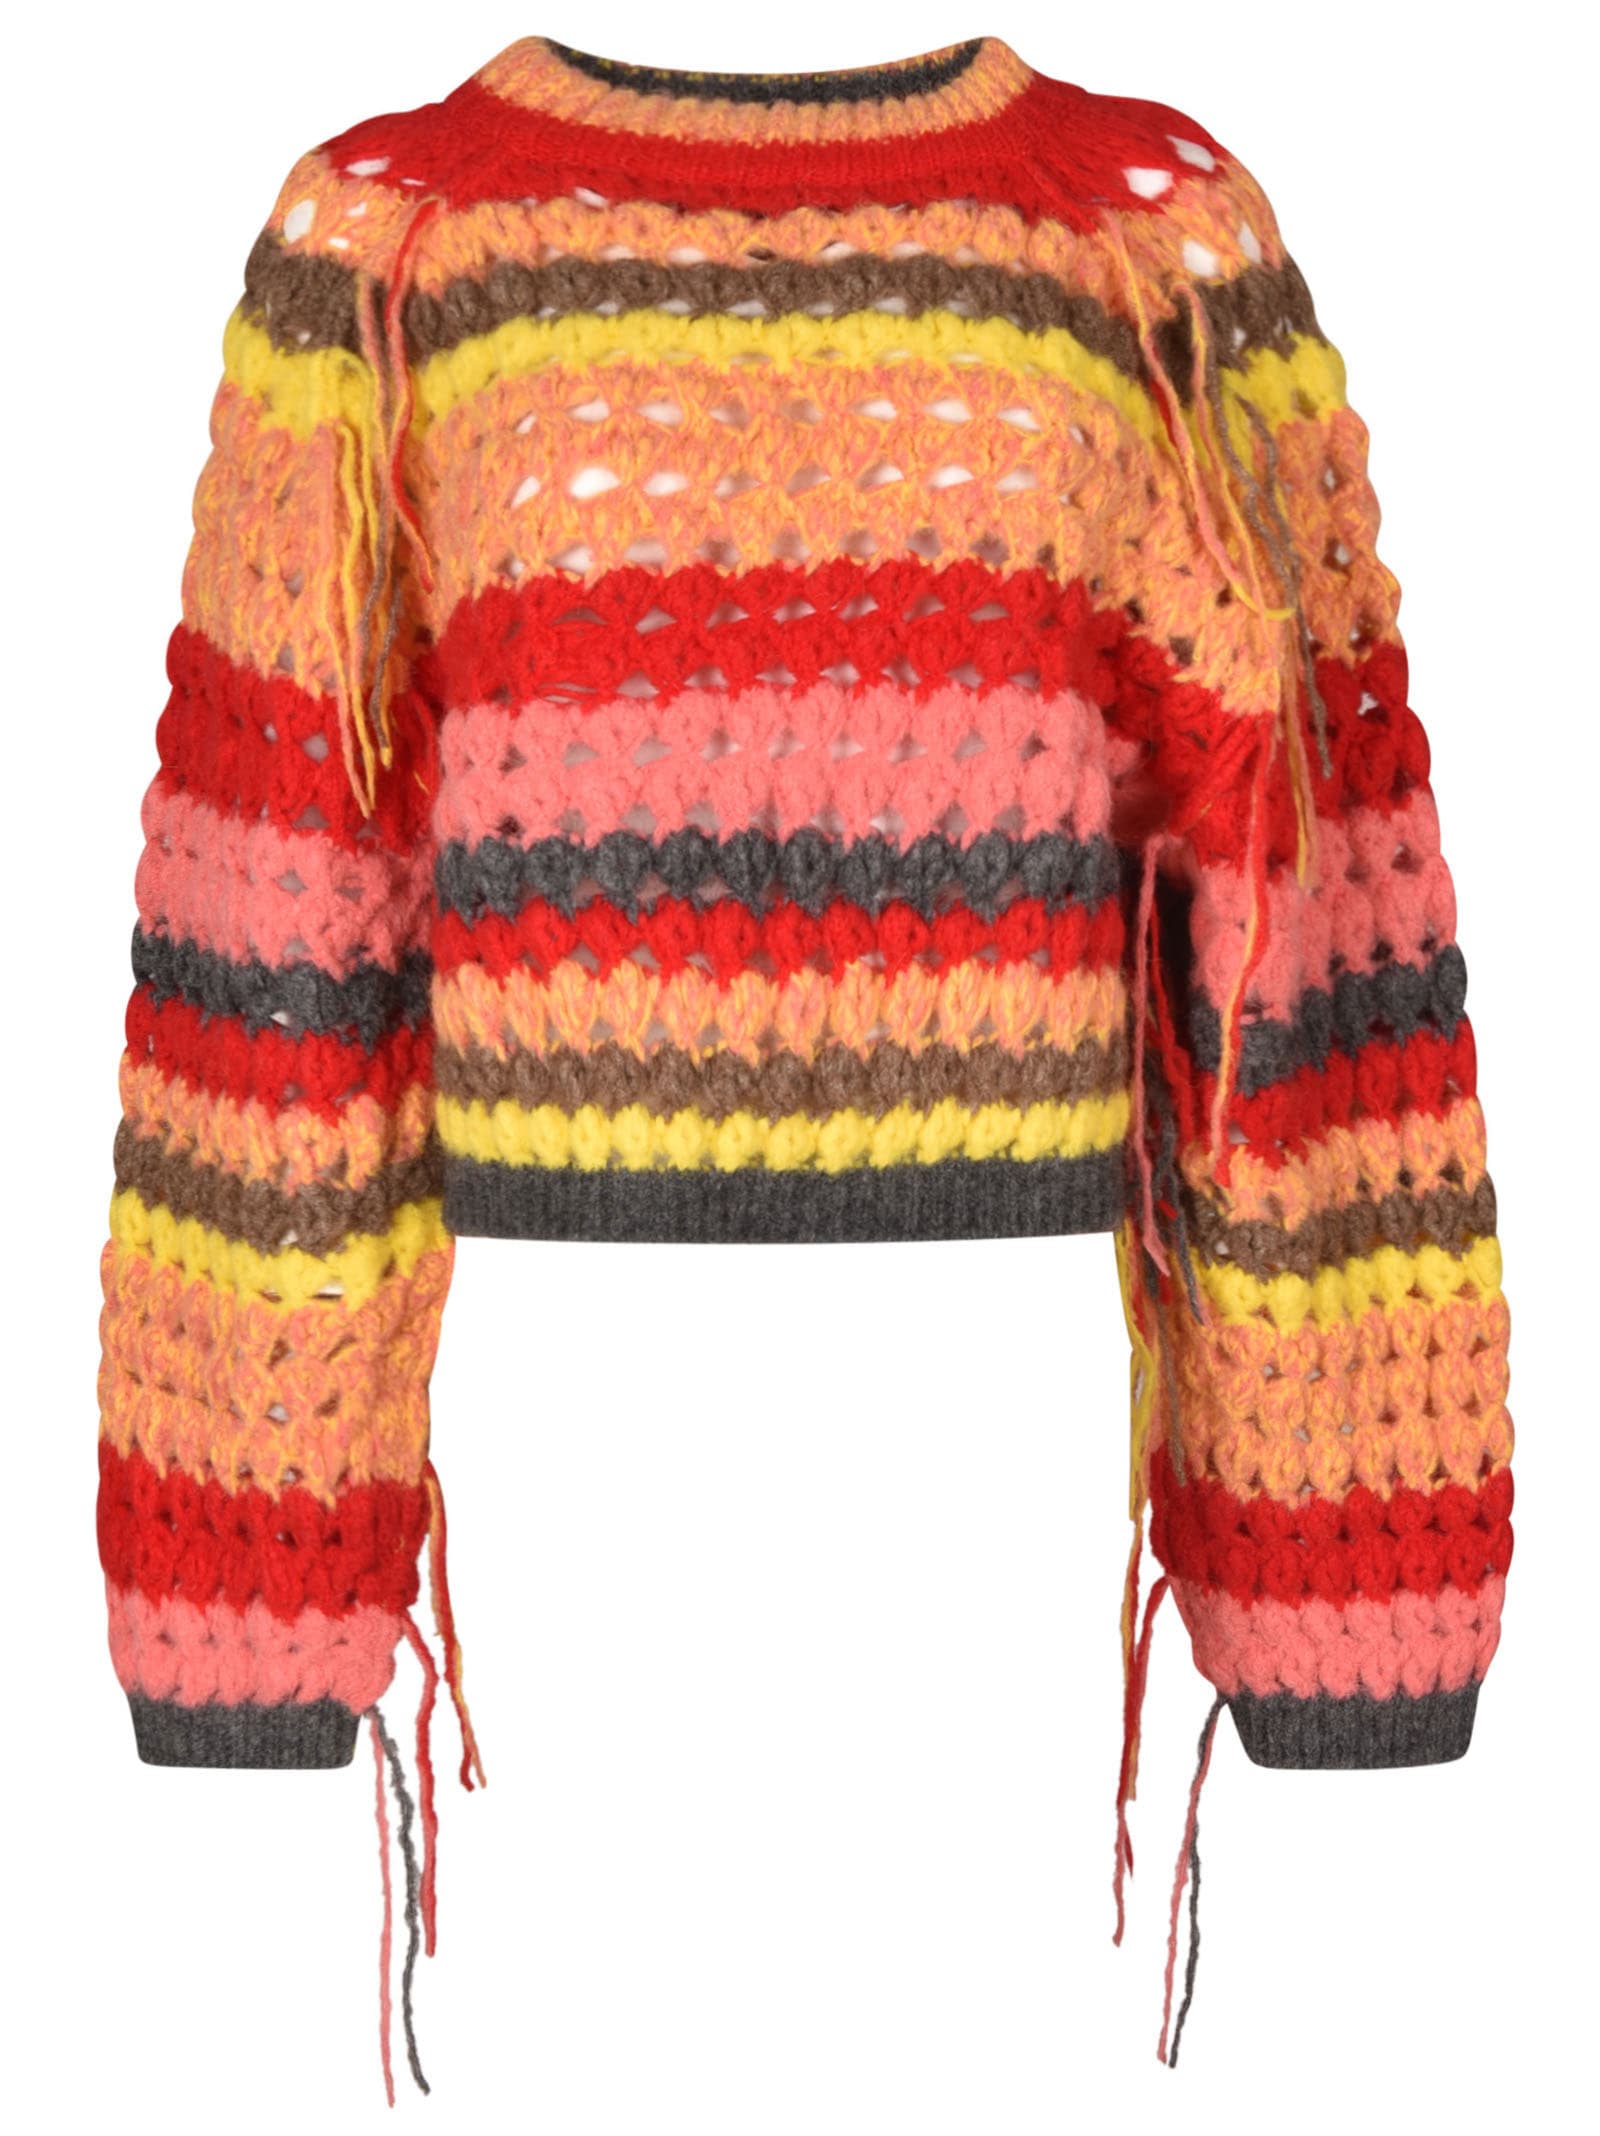 Circus Hotel Striped Woven Sweater